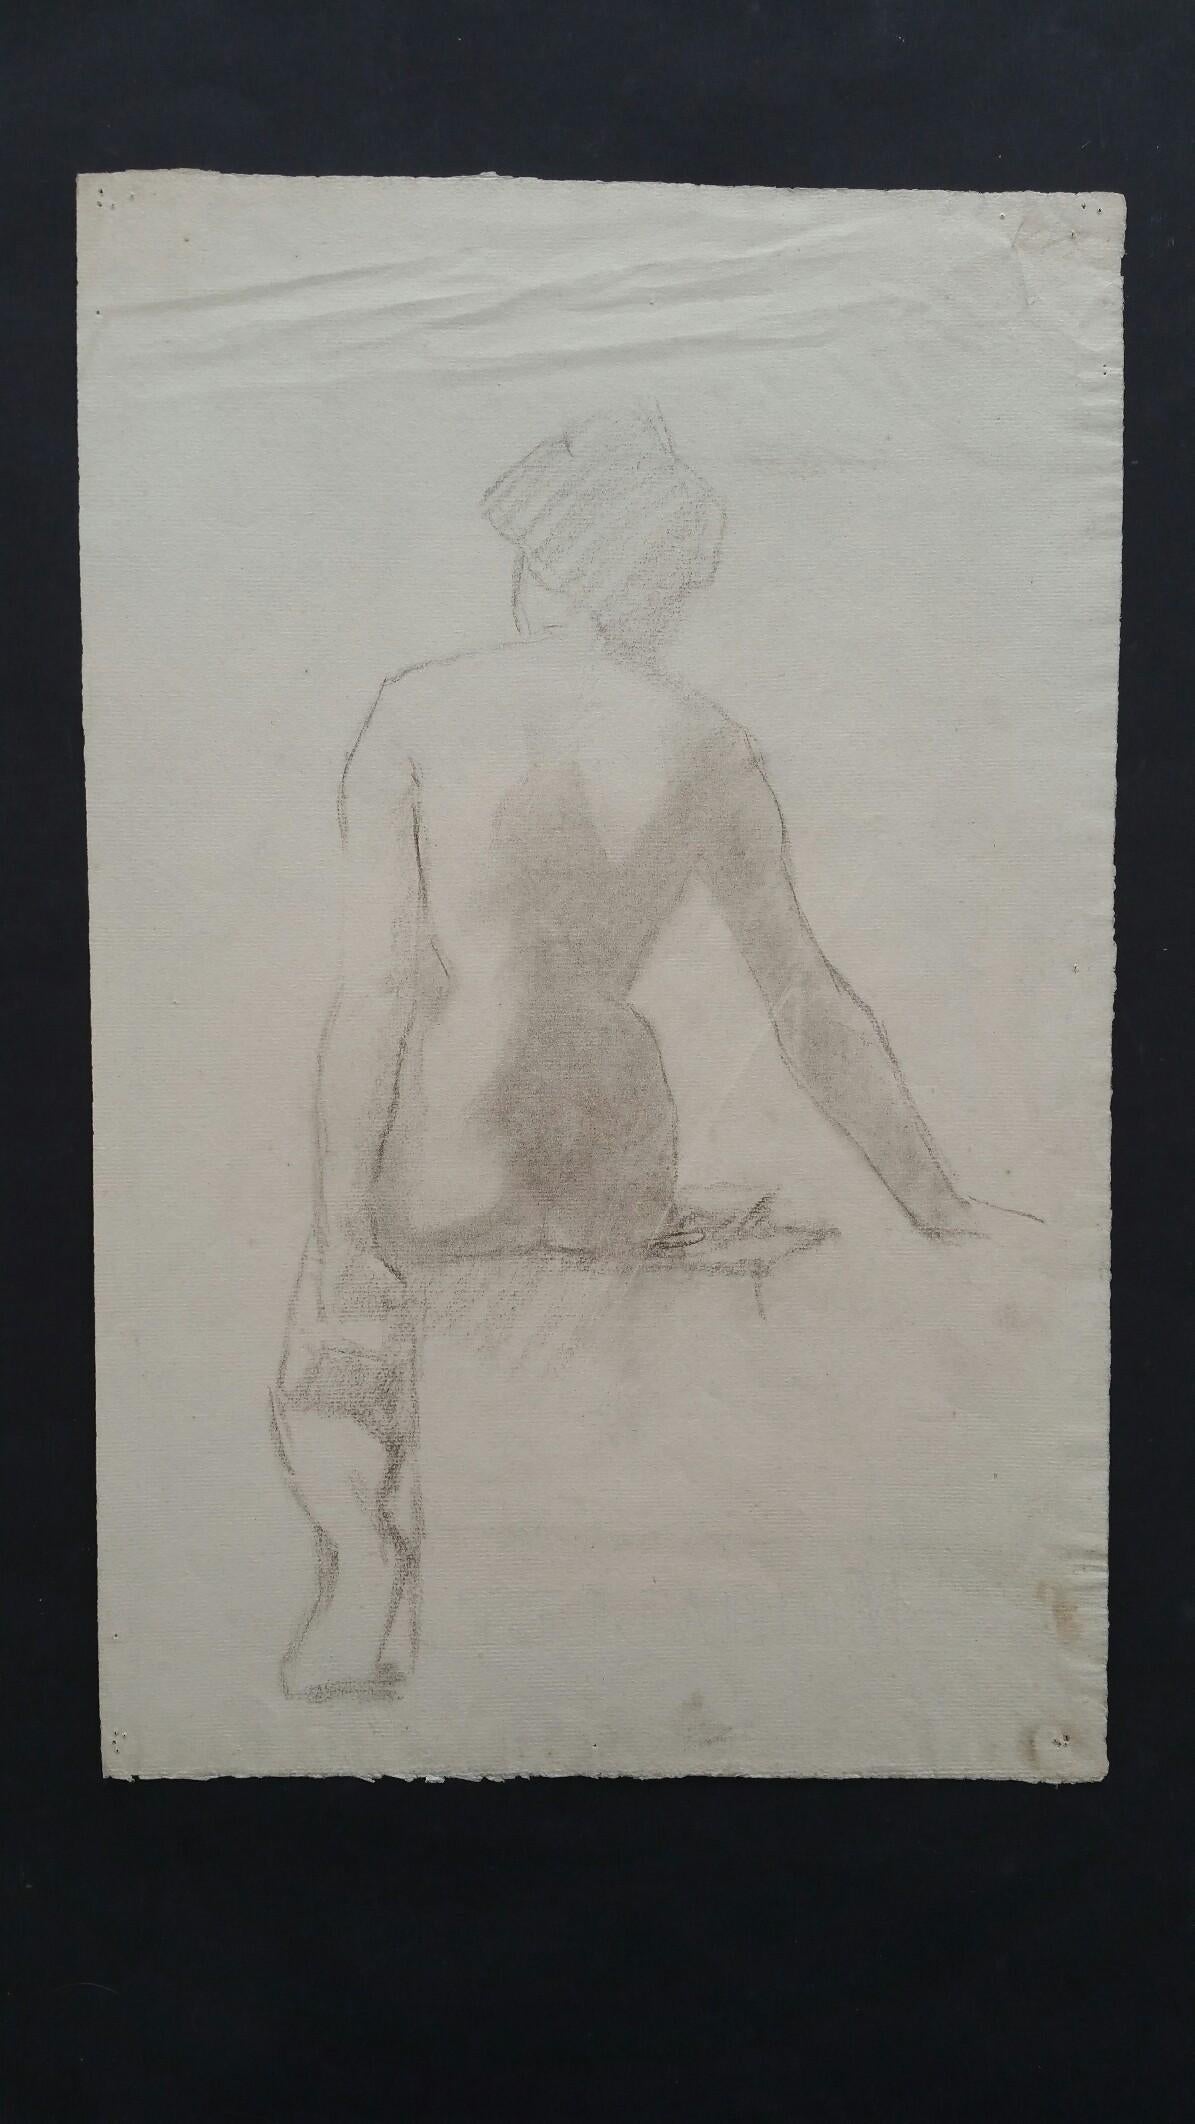 English graphite sketch of a female nude, back view, seated.
by Henry George Moon (British 1857-1905).
on off white artists paper, unframed.
Measurements: sheet 18.75 x 12 inches.

Provenance: from the artists estate

Condition report: pin